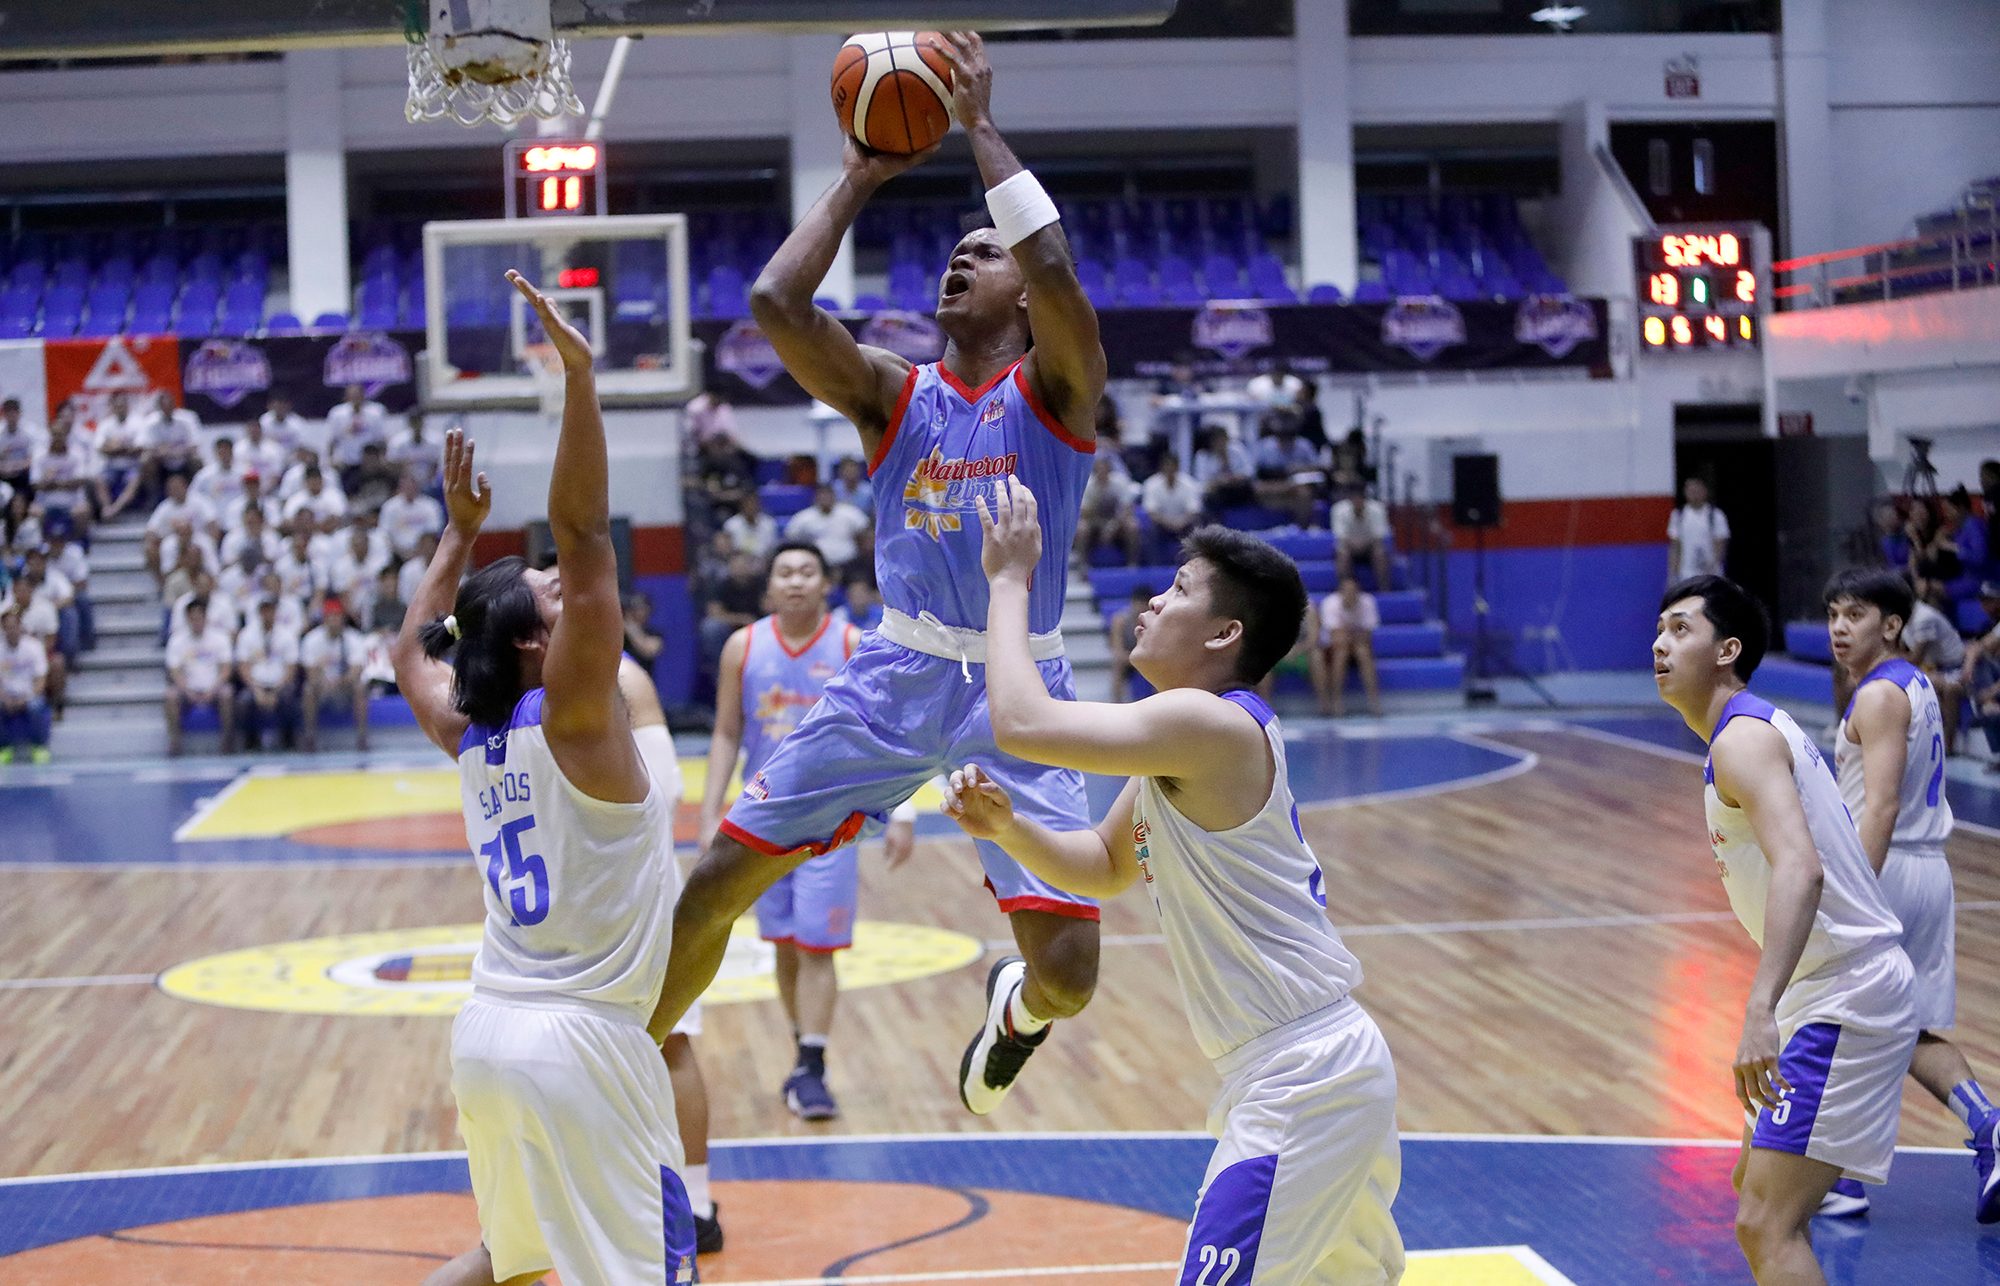 Foes-turned-friends Tratter, Tolentino lead Marinerong Pilipino to D-League semis